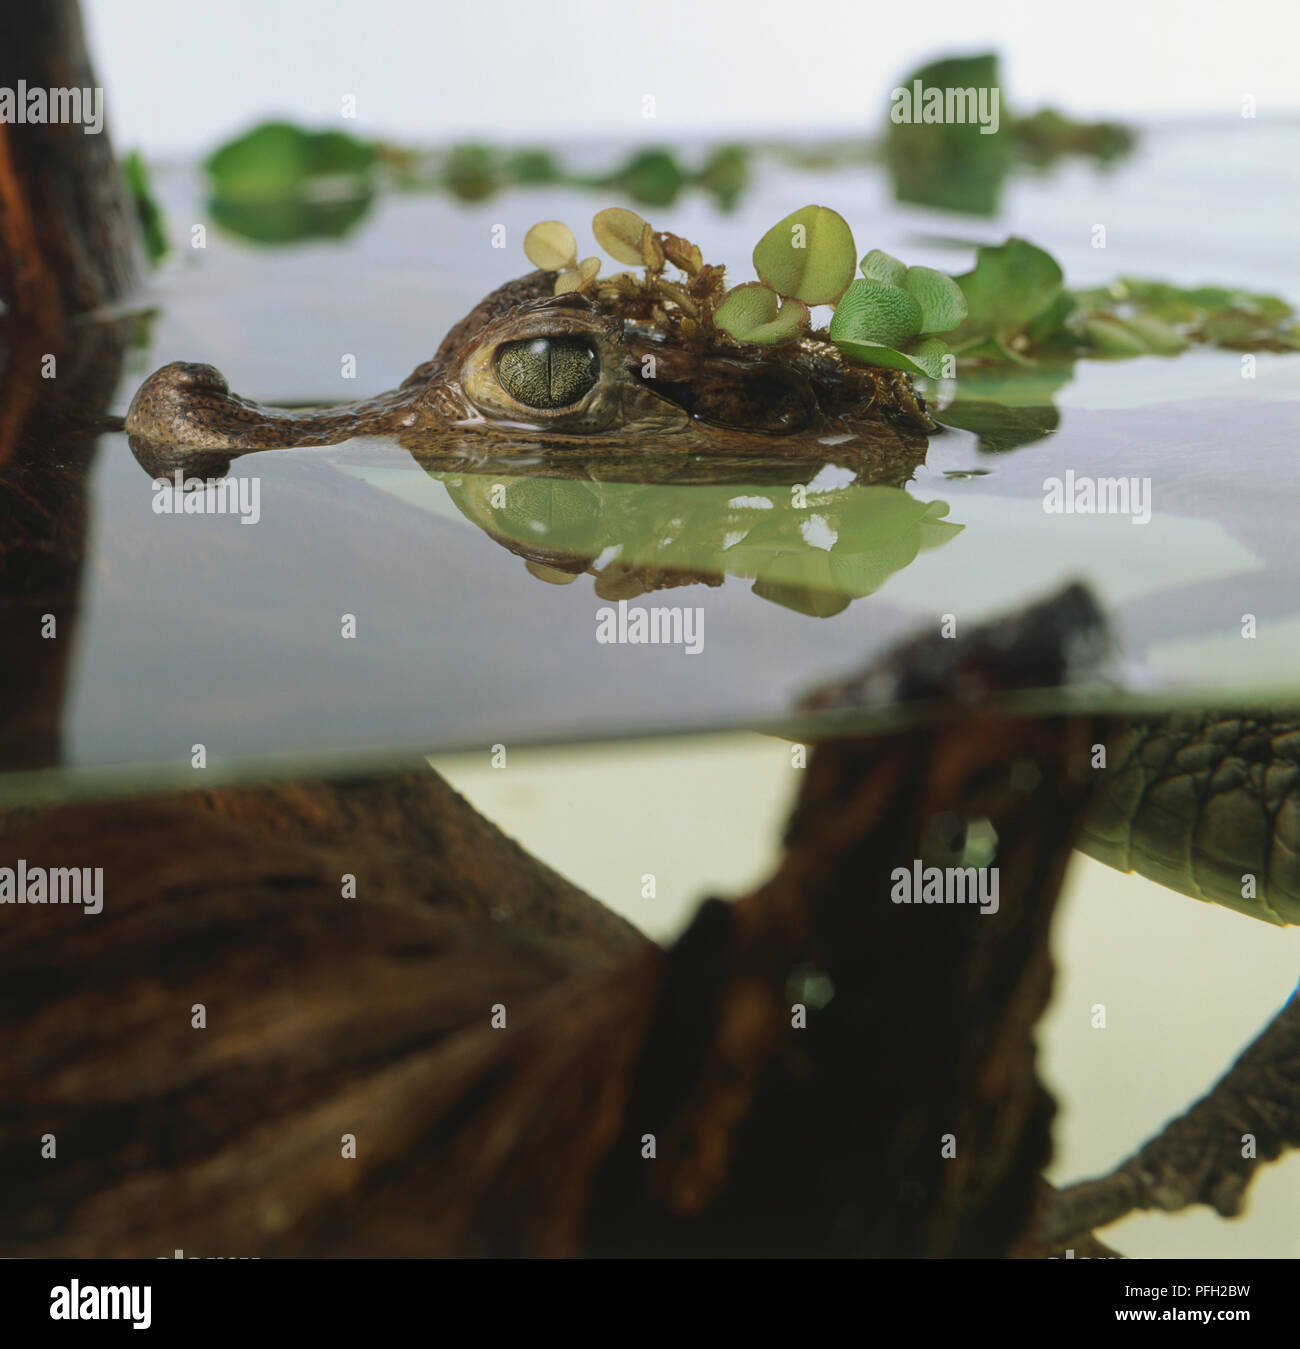 Young Spectacled Caiman (Caiman crocodilus) with head half submerged in water using aquatic plant leaves as camouflage Stock Photo